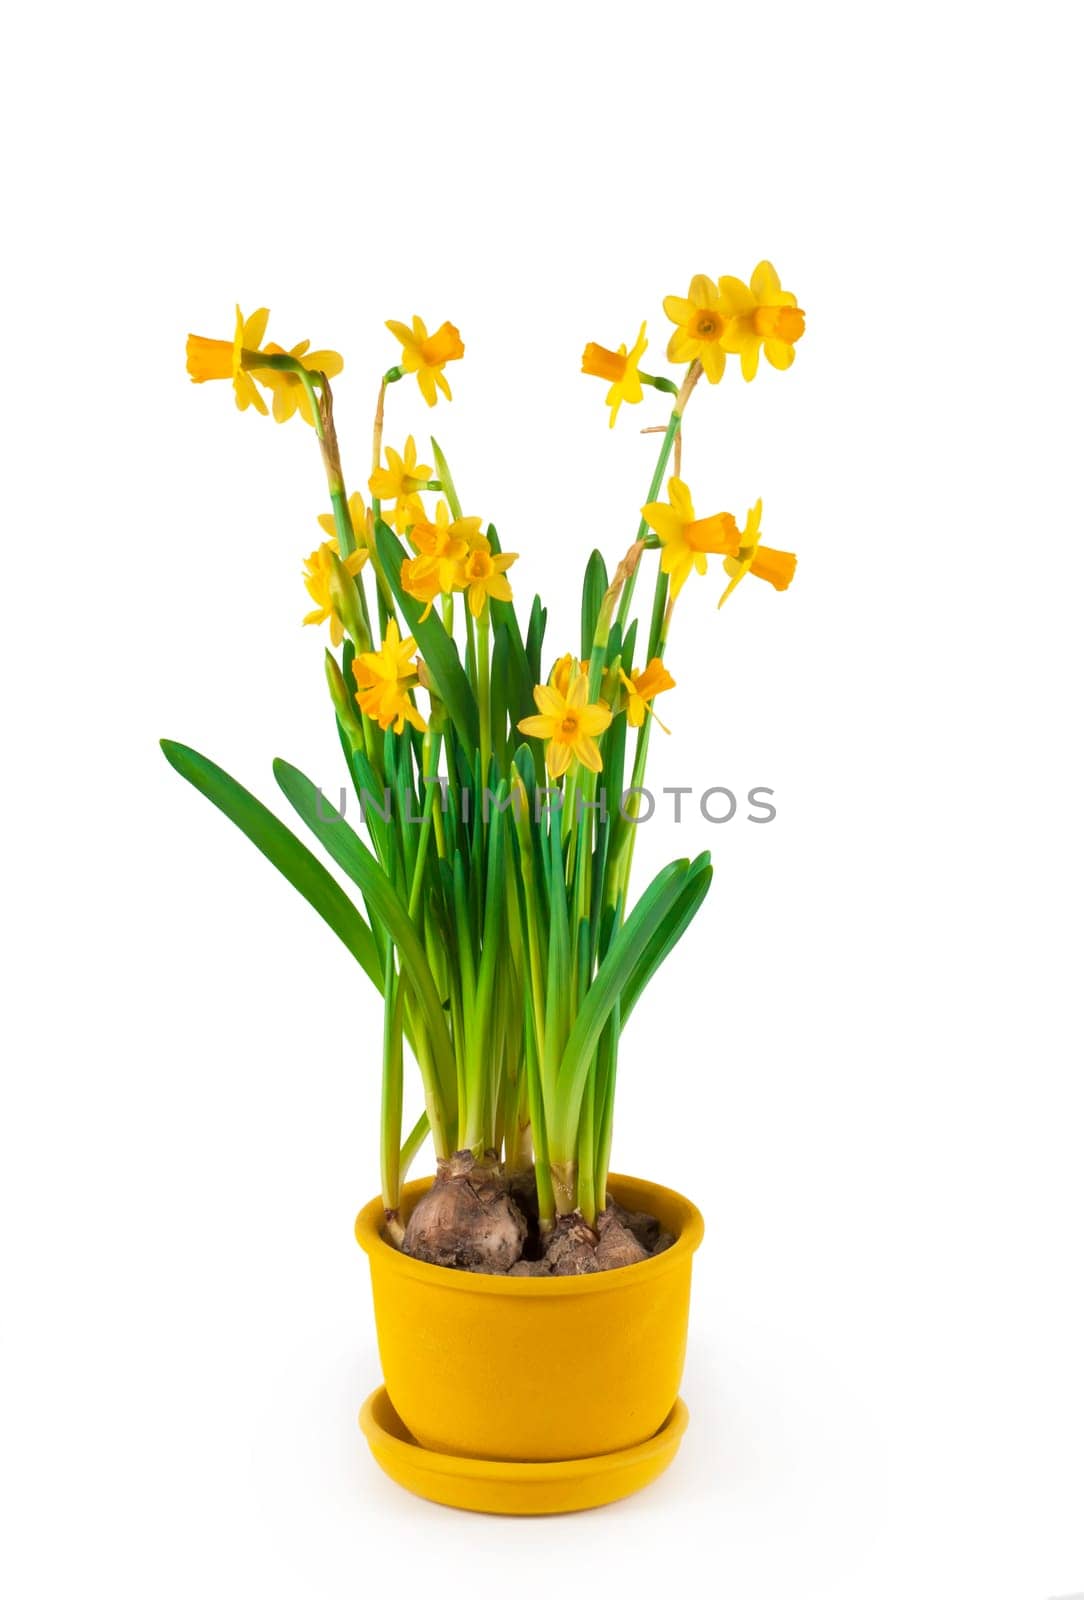 Daffodils in flower pot isolated on white background